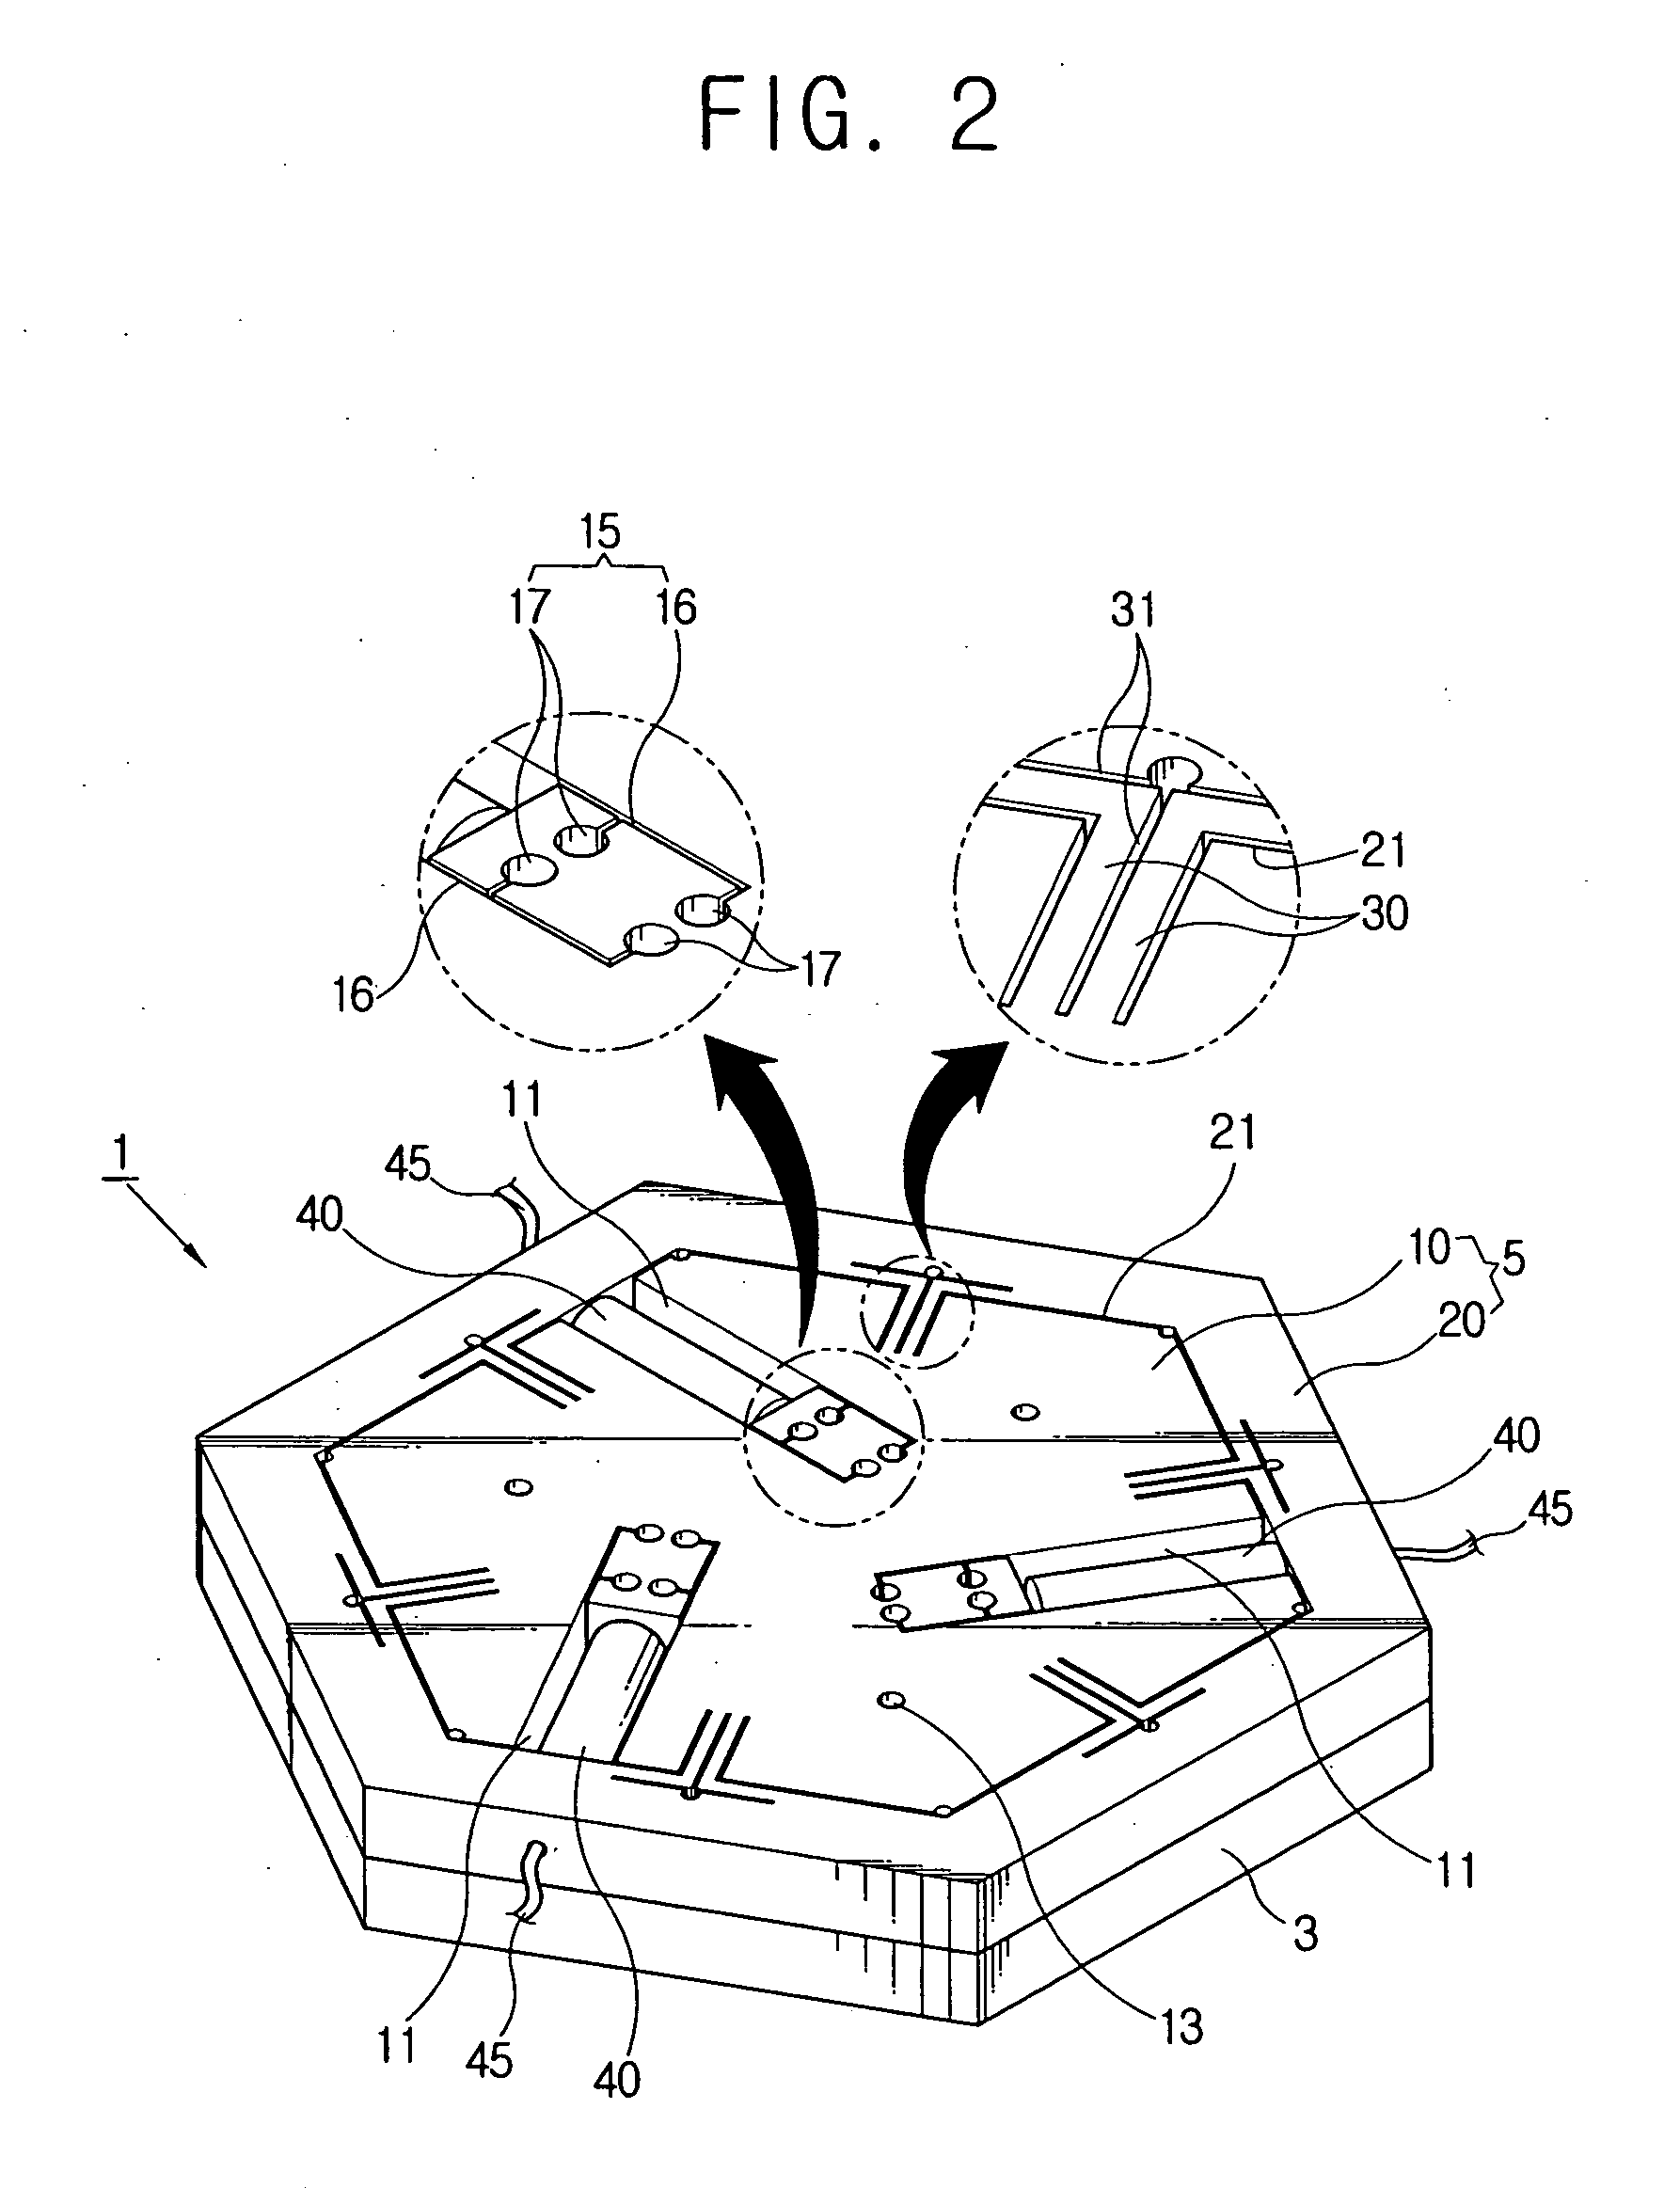 Stage apparatus